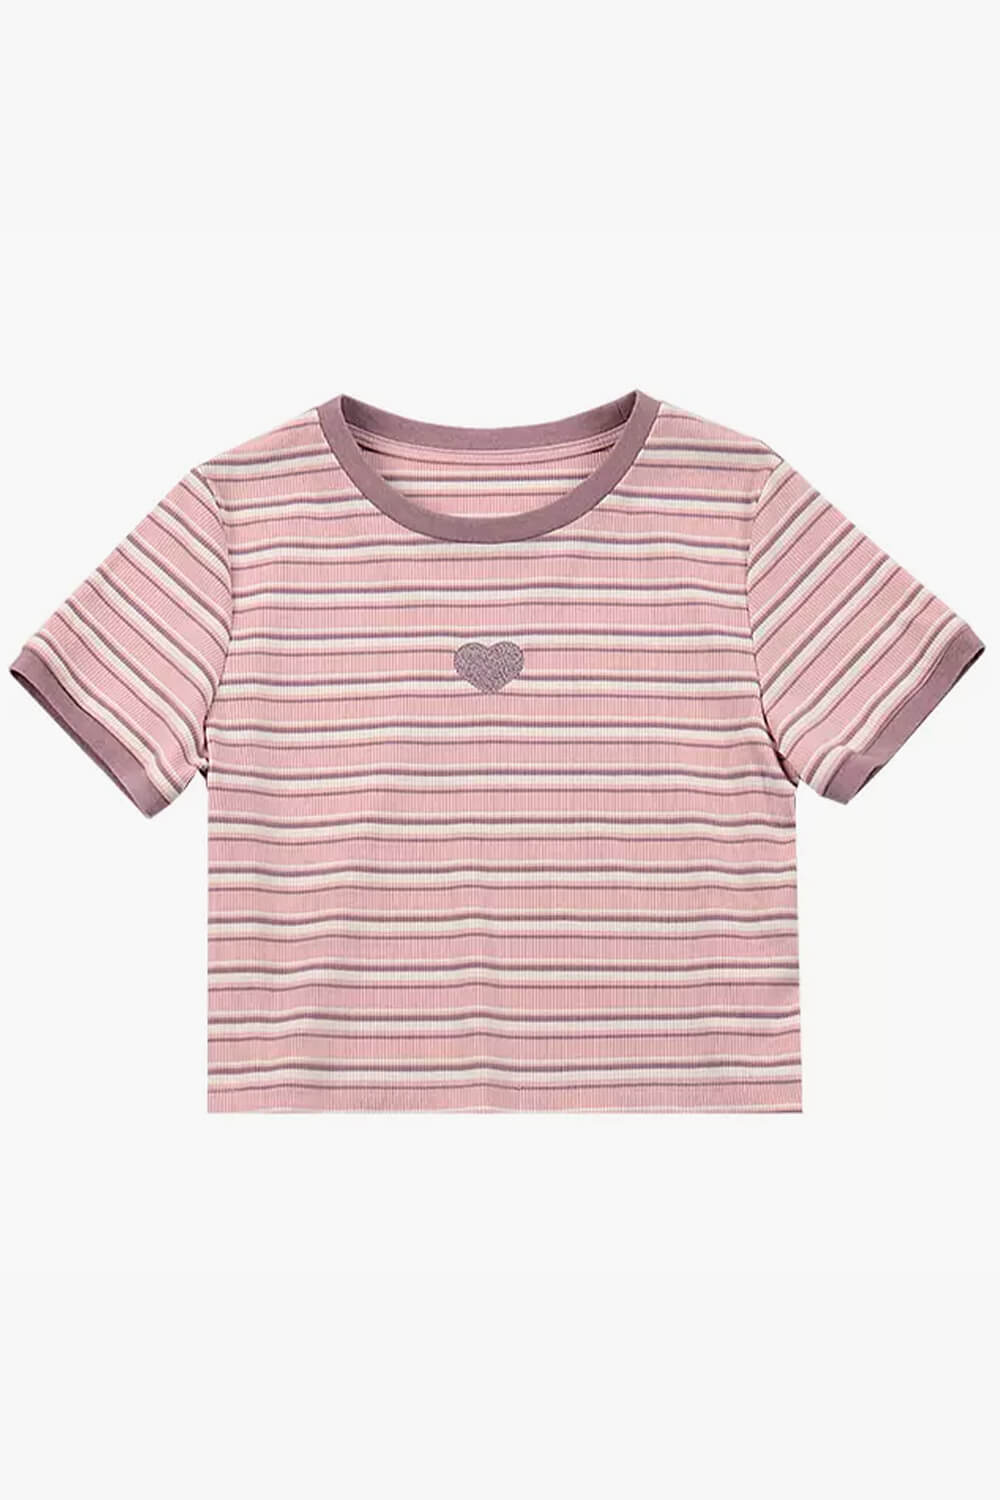 Pastel Pink Striped Crop Top With Heart